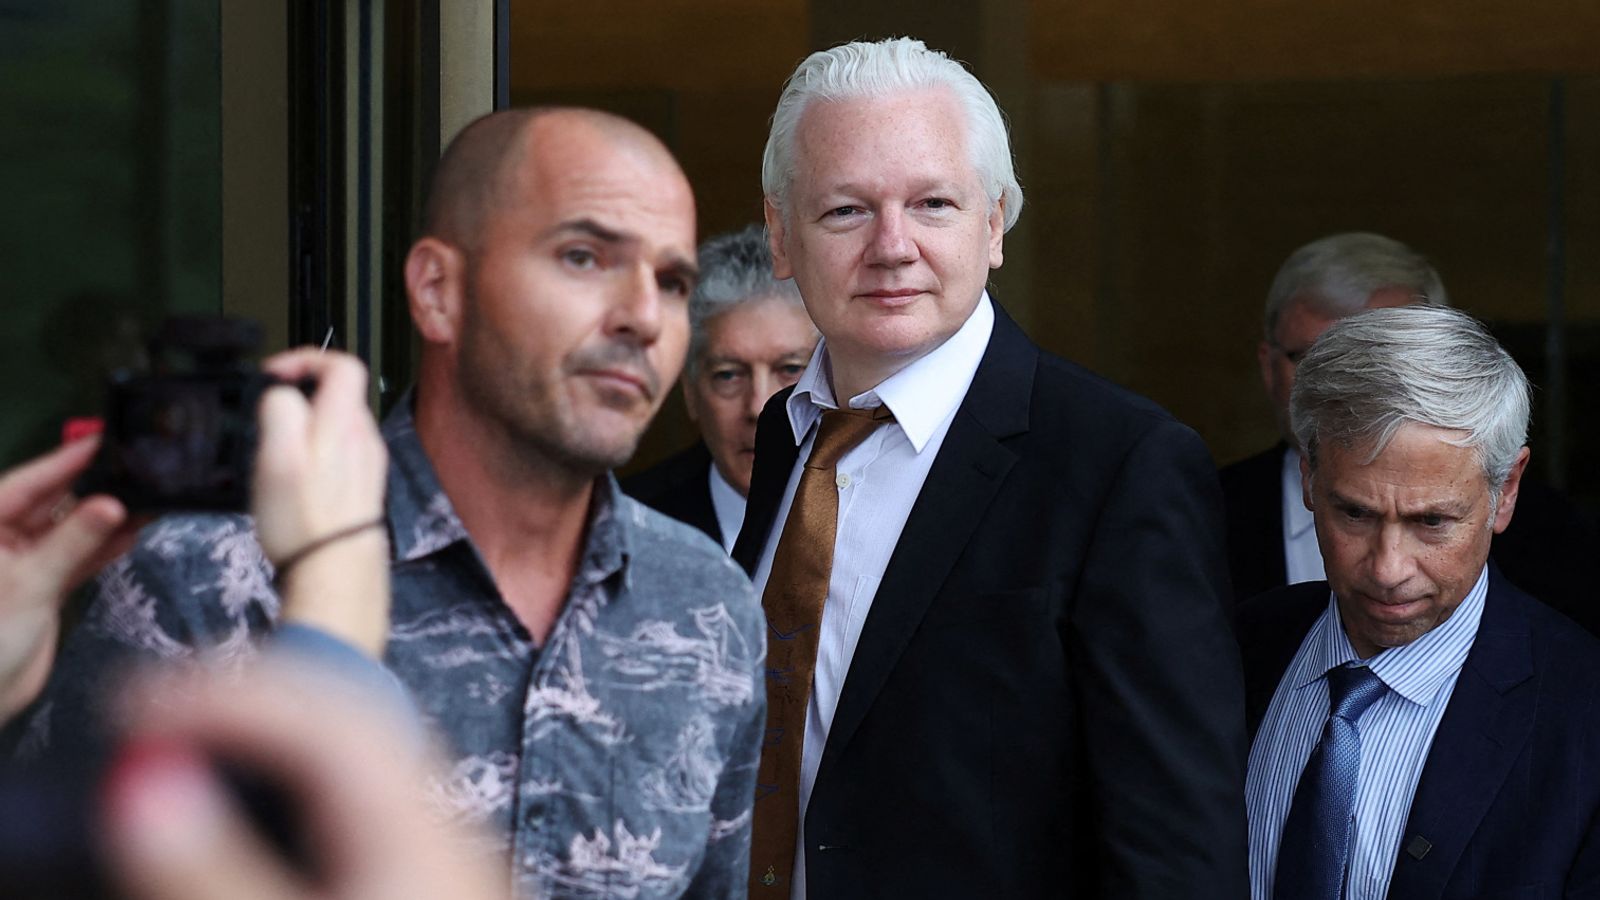 Julian Assange formally admits spying charge as part of a plea deal with US authorities